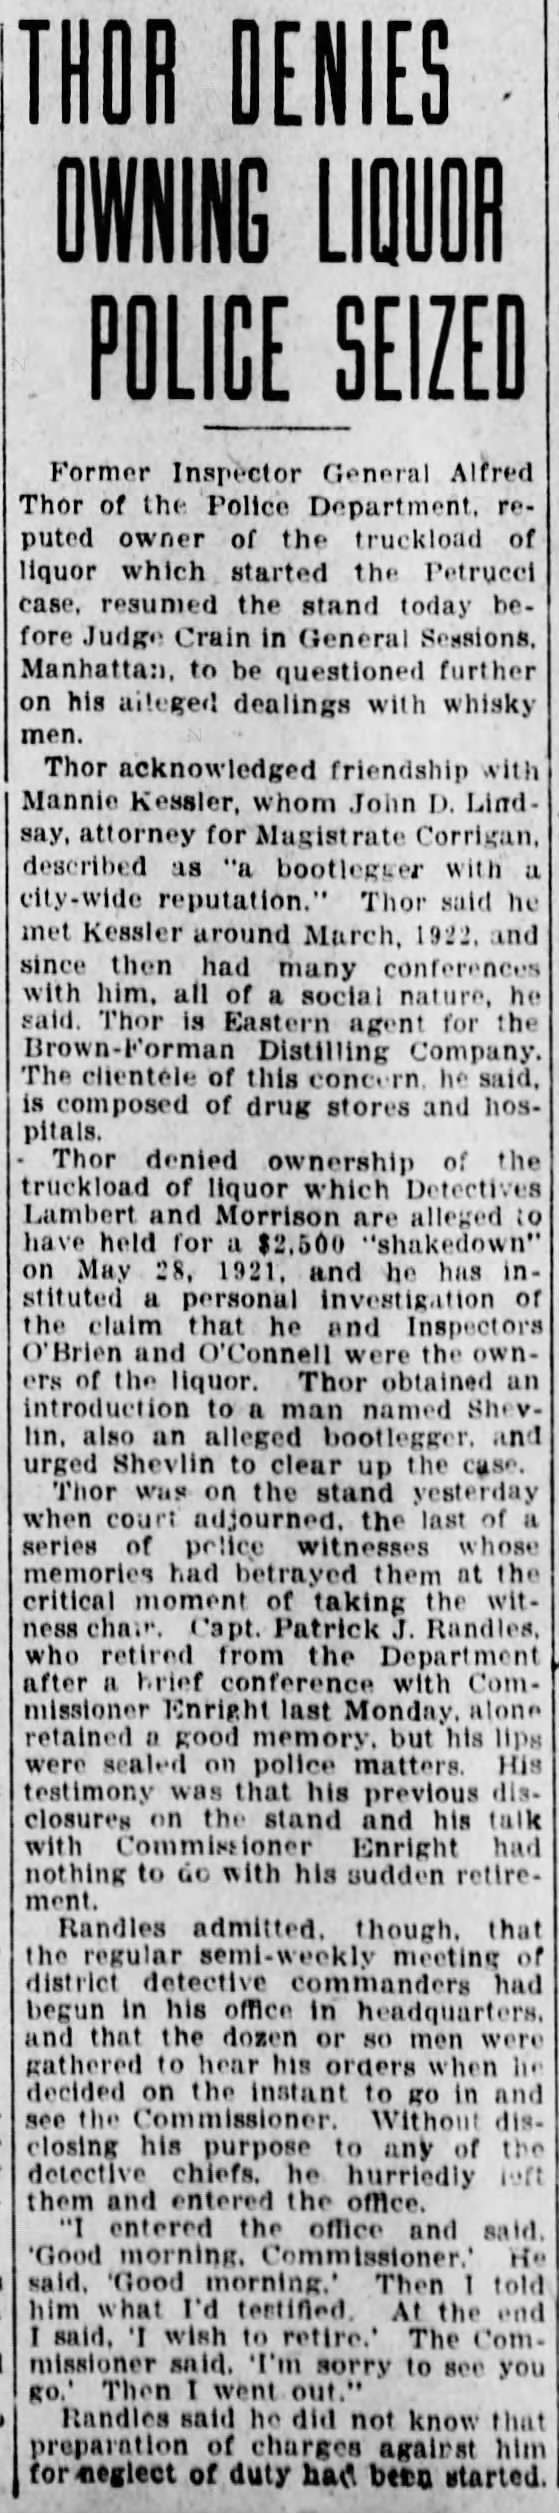 Thor defends himself 19 Sep 1923 Brooklyn Daily Eagle